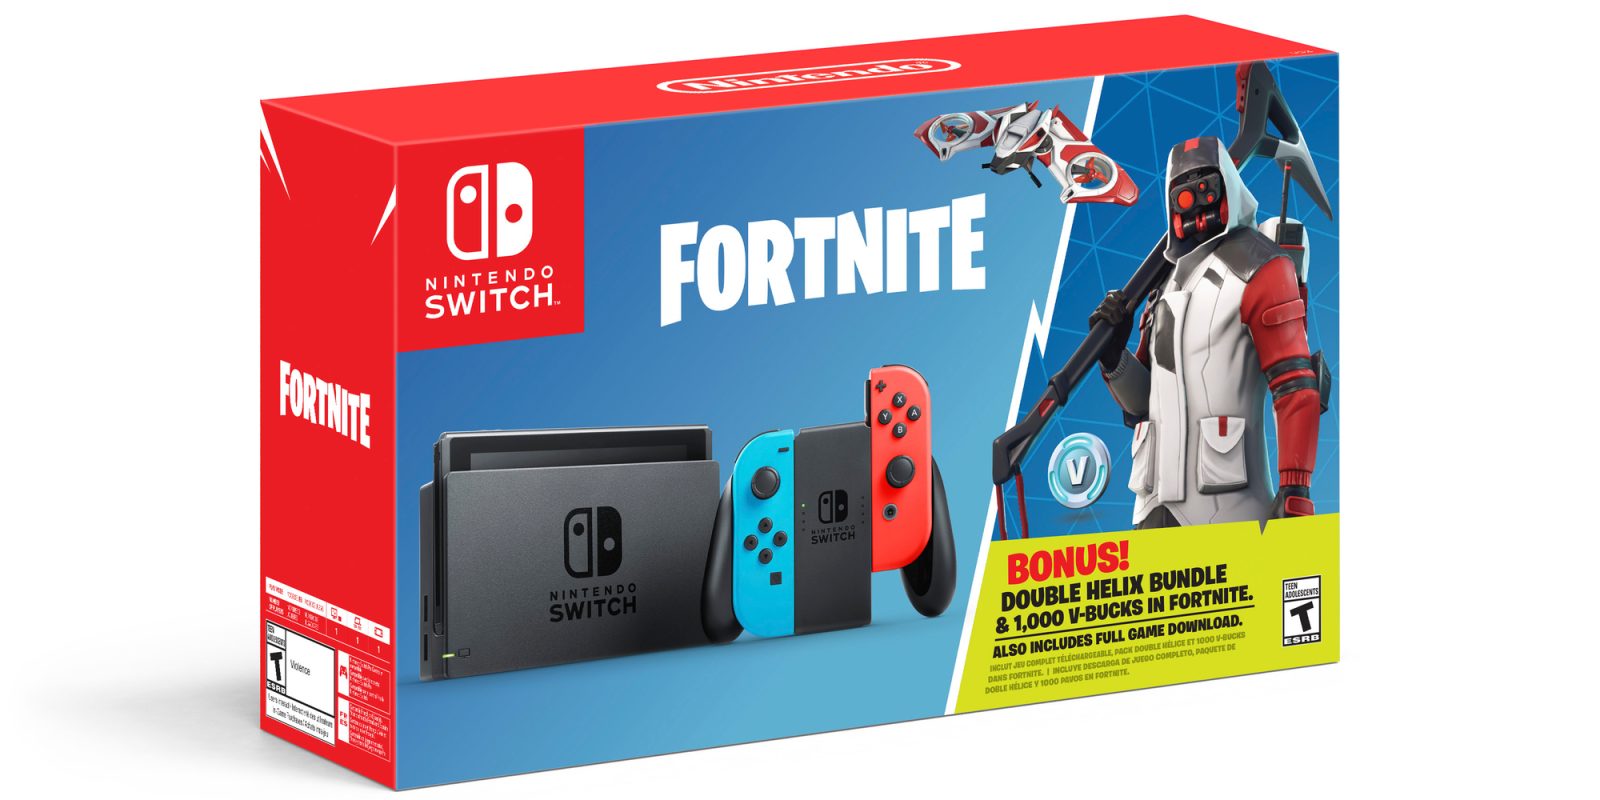 Nintendo announces Fornite Switch bundle complete with V ... - 1600 x 800 jpeg 125kB